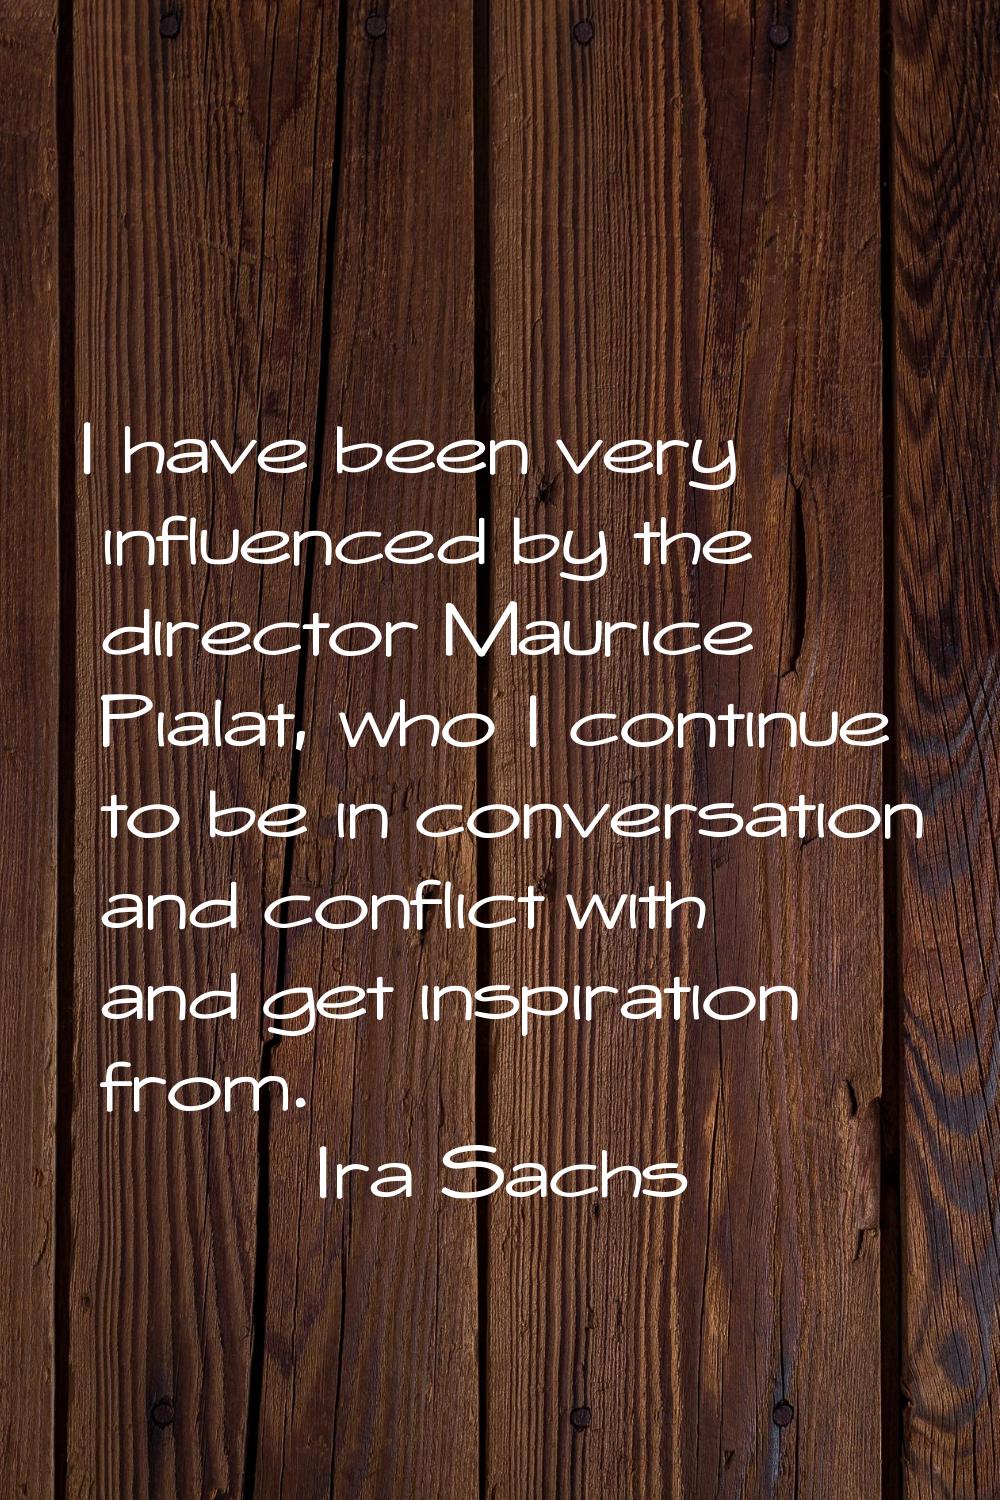 I have been very influenced by the director Maurice Pialat, who I continue to be in conversation an